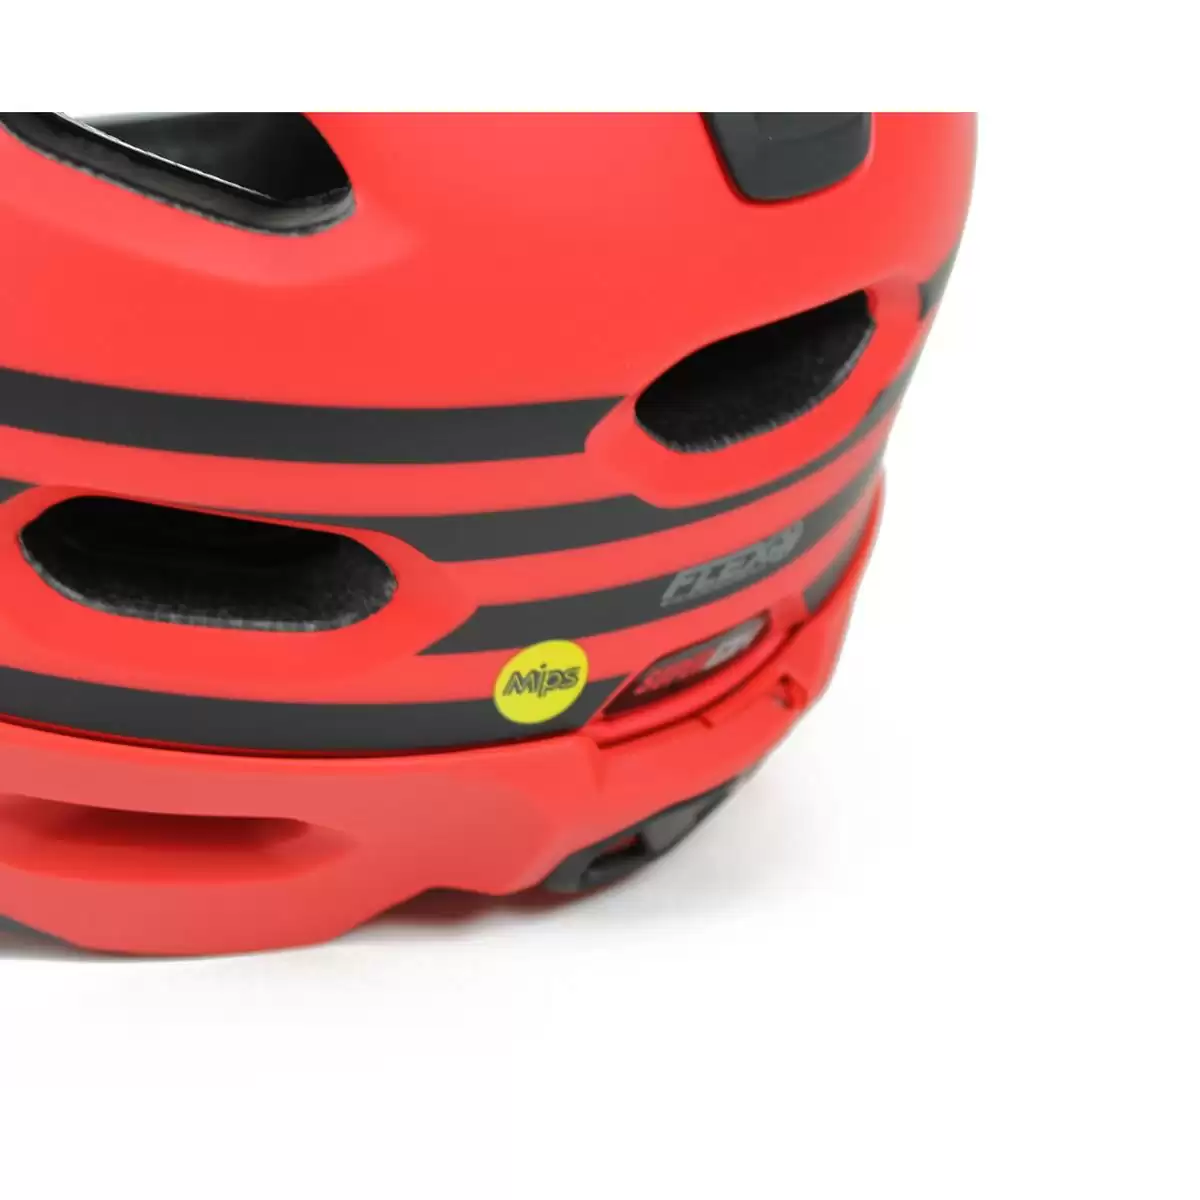 Helmet Super DH MIPS Fasthouse Red Size M (55-59cm) #8